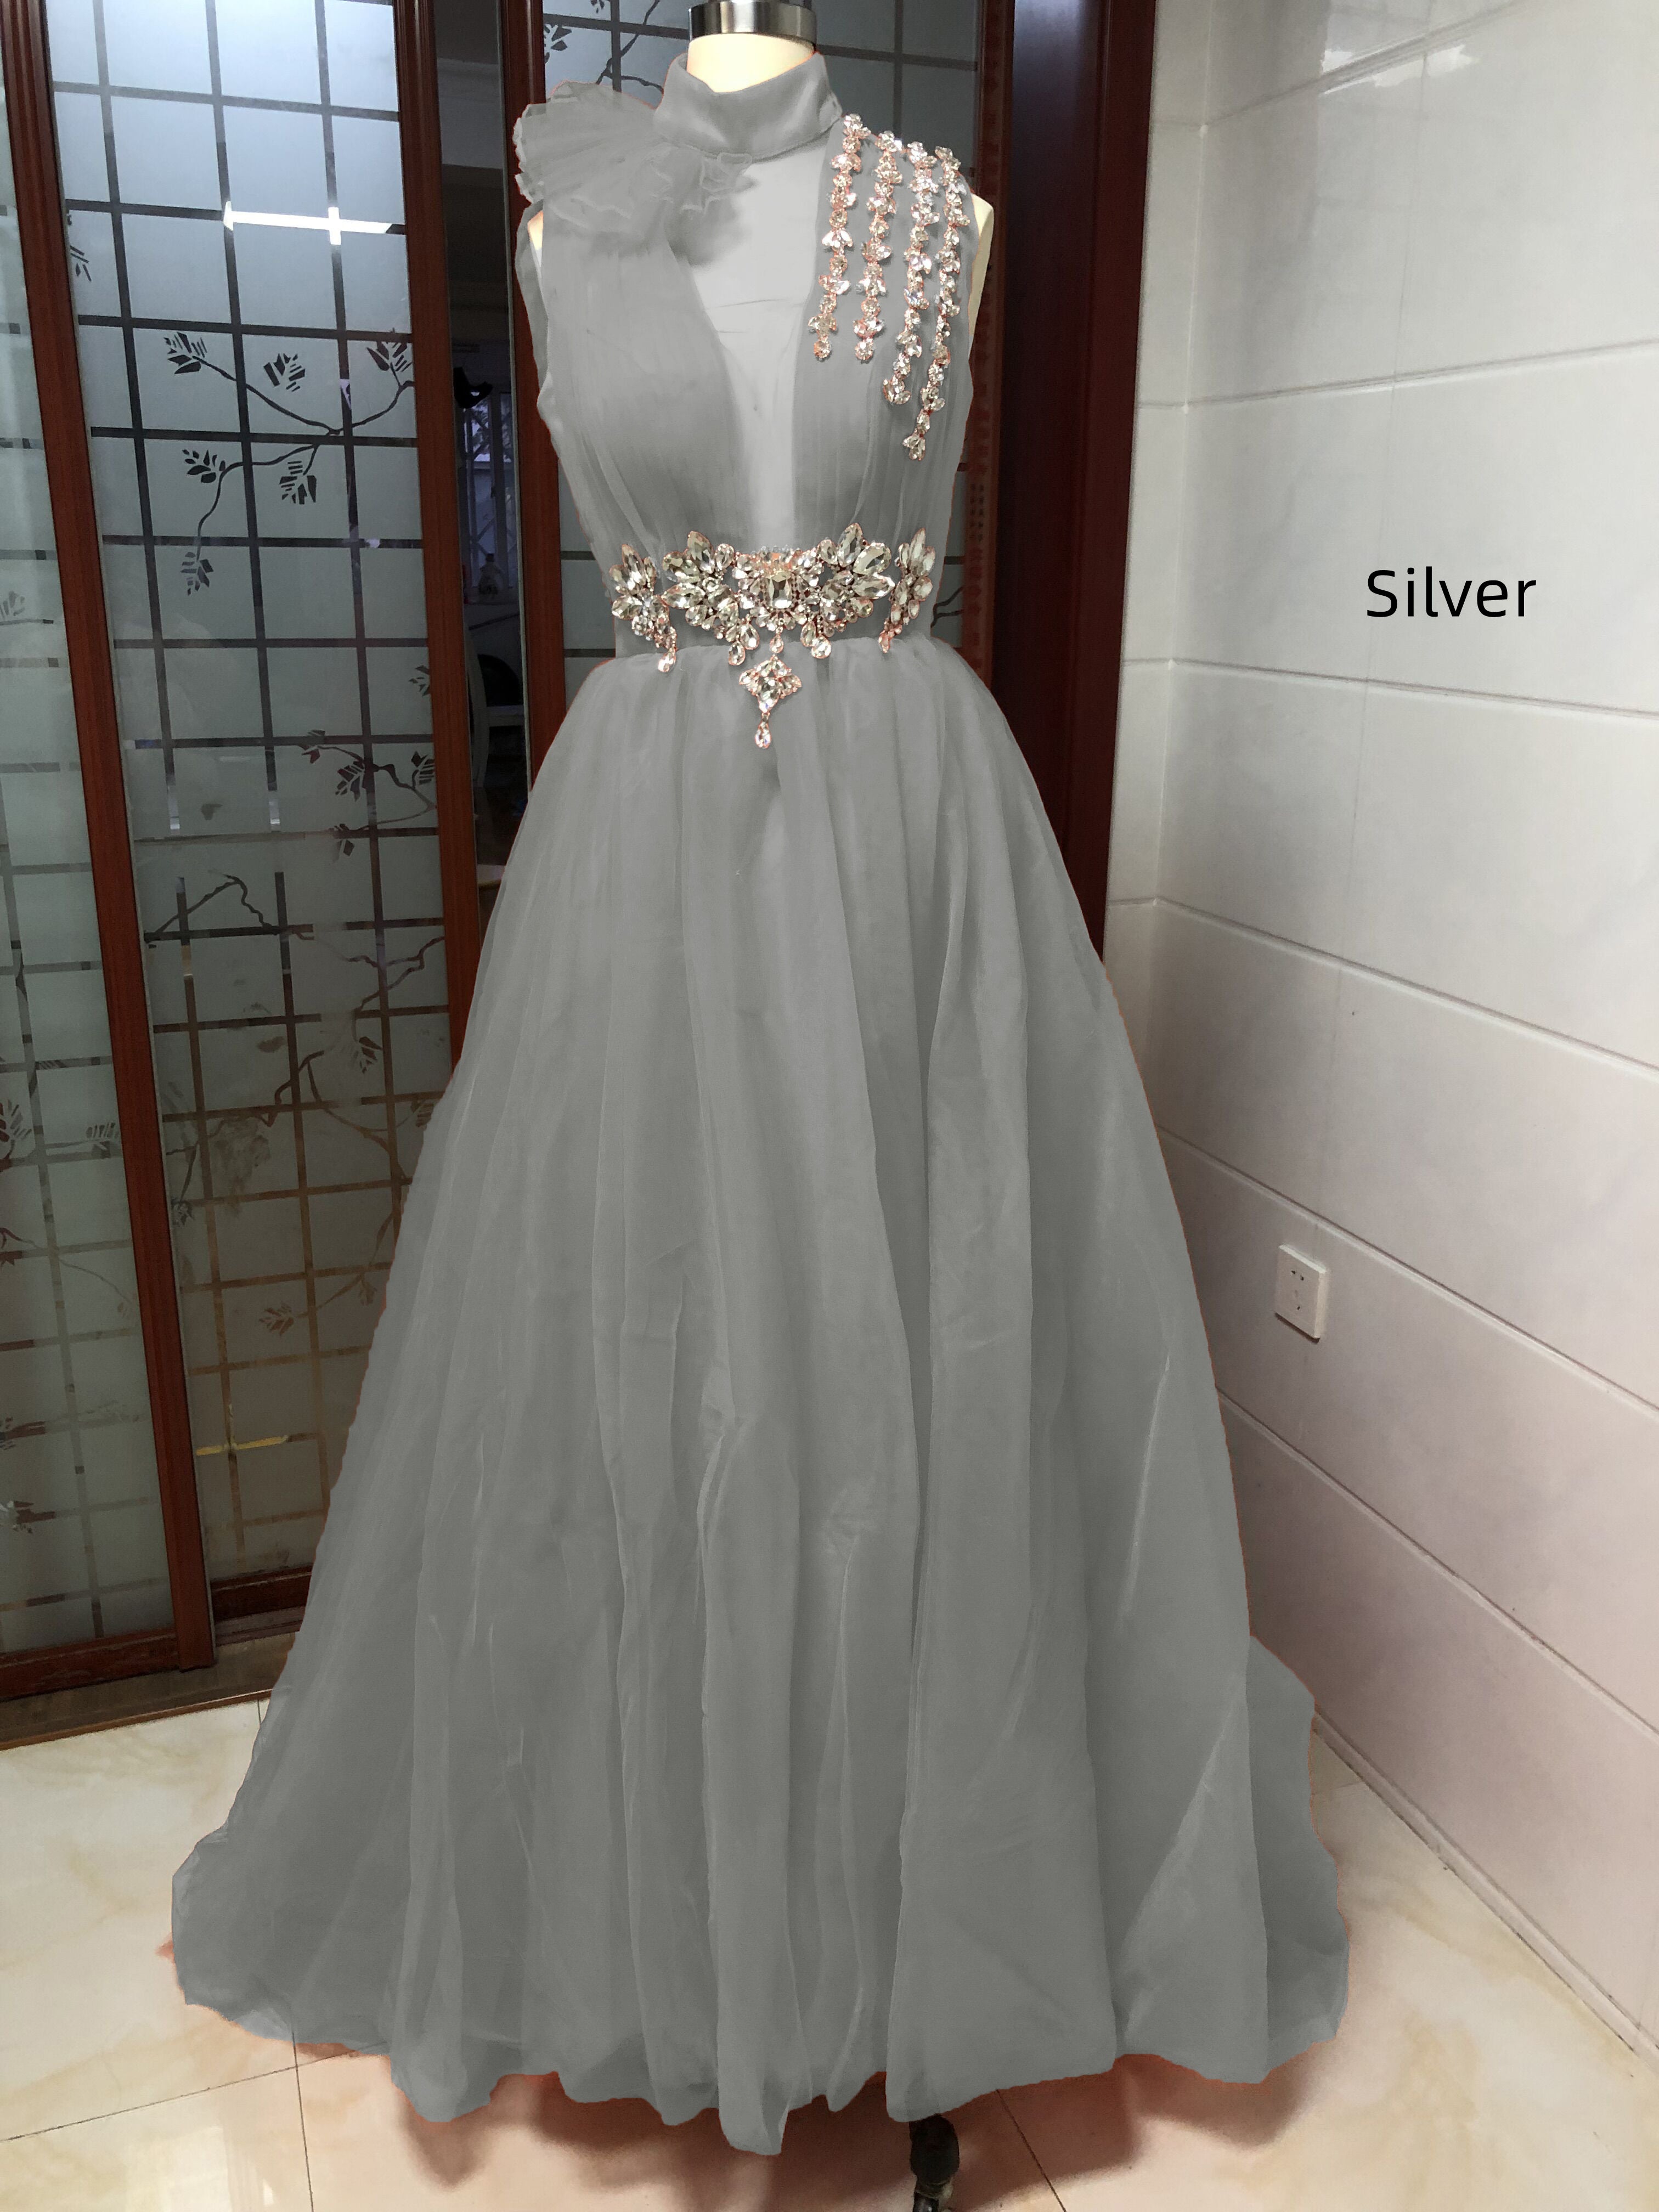 Wedding Dresses for Bride High Neck Thigh-High Slits Hollow Beads Crystal Bridal Gowns robe